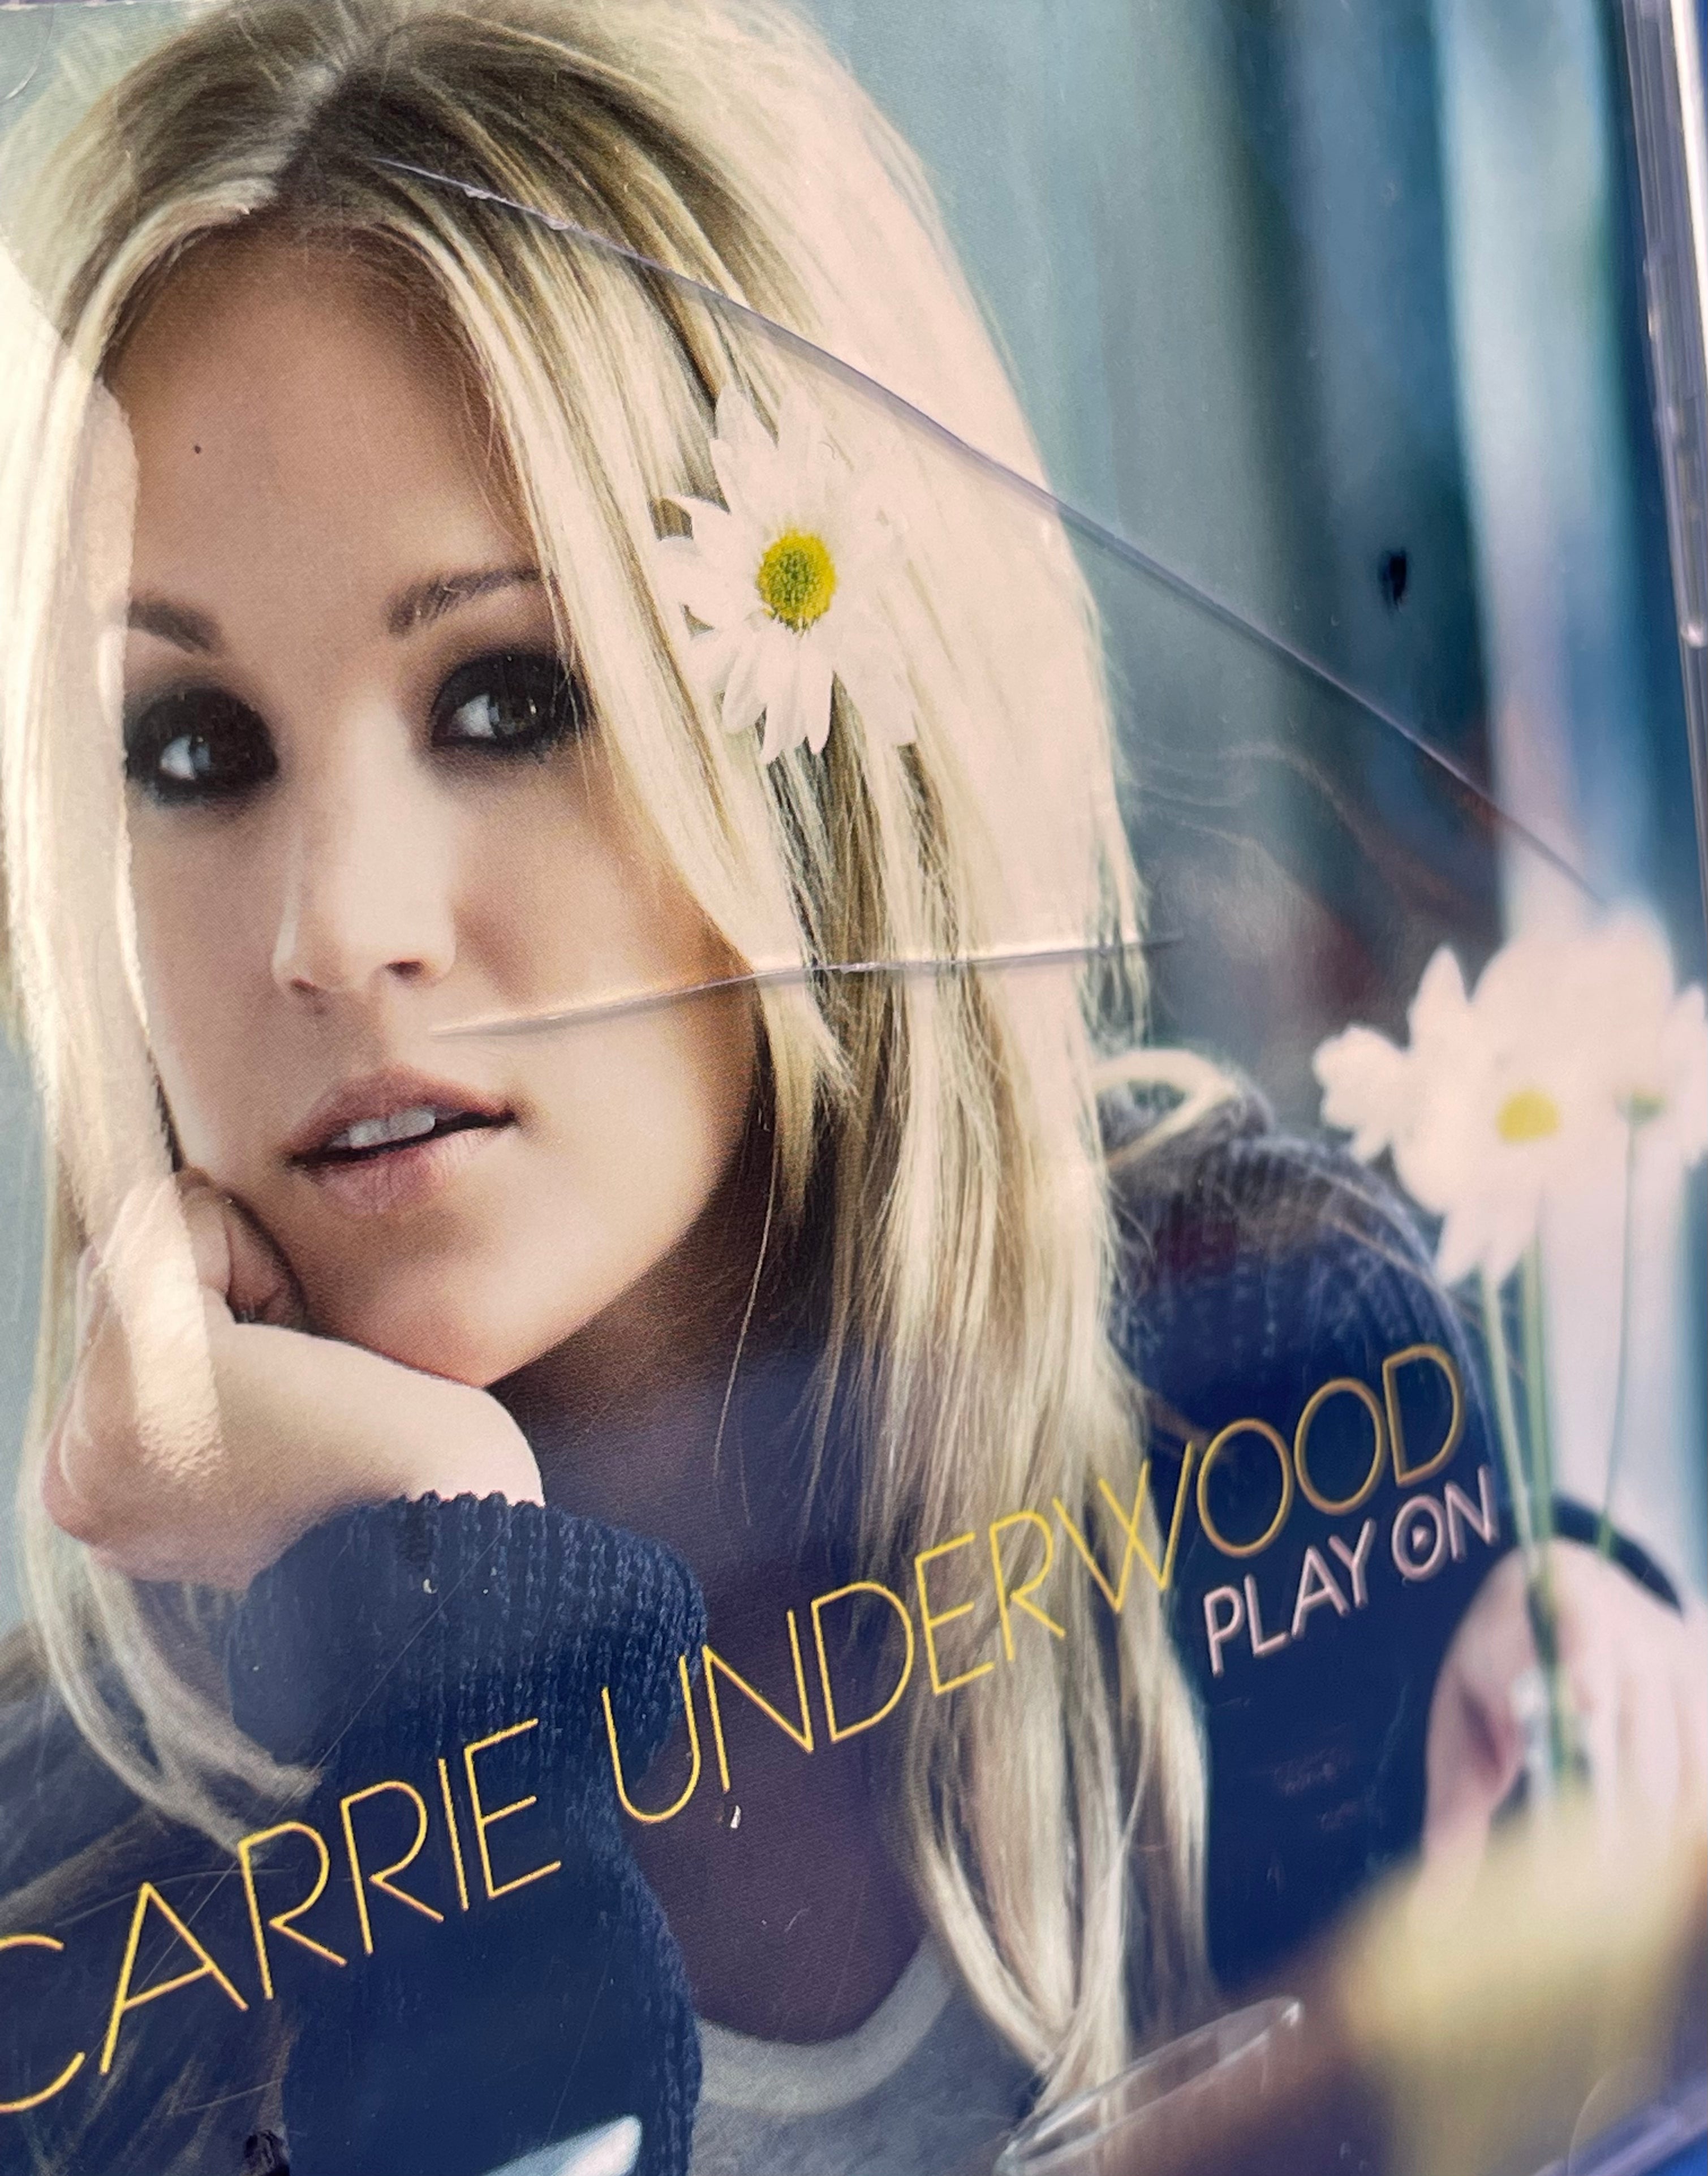 Carrie Underwood Play On (2009, CD)